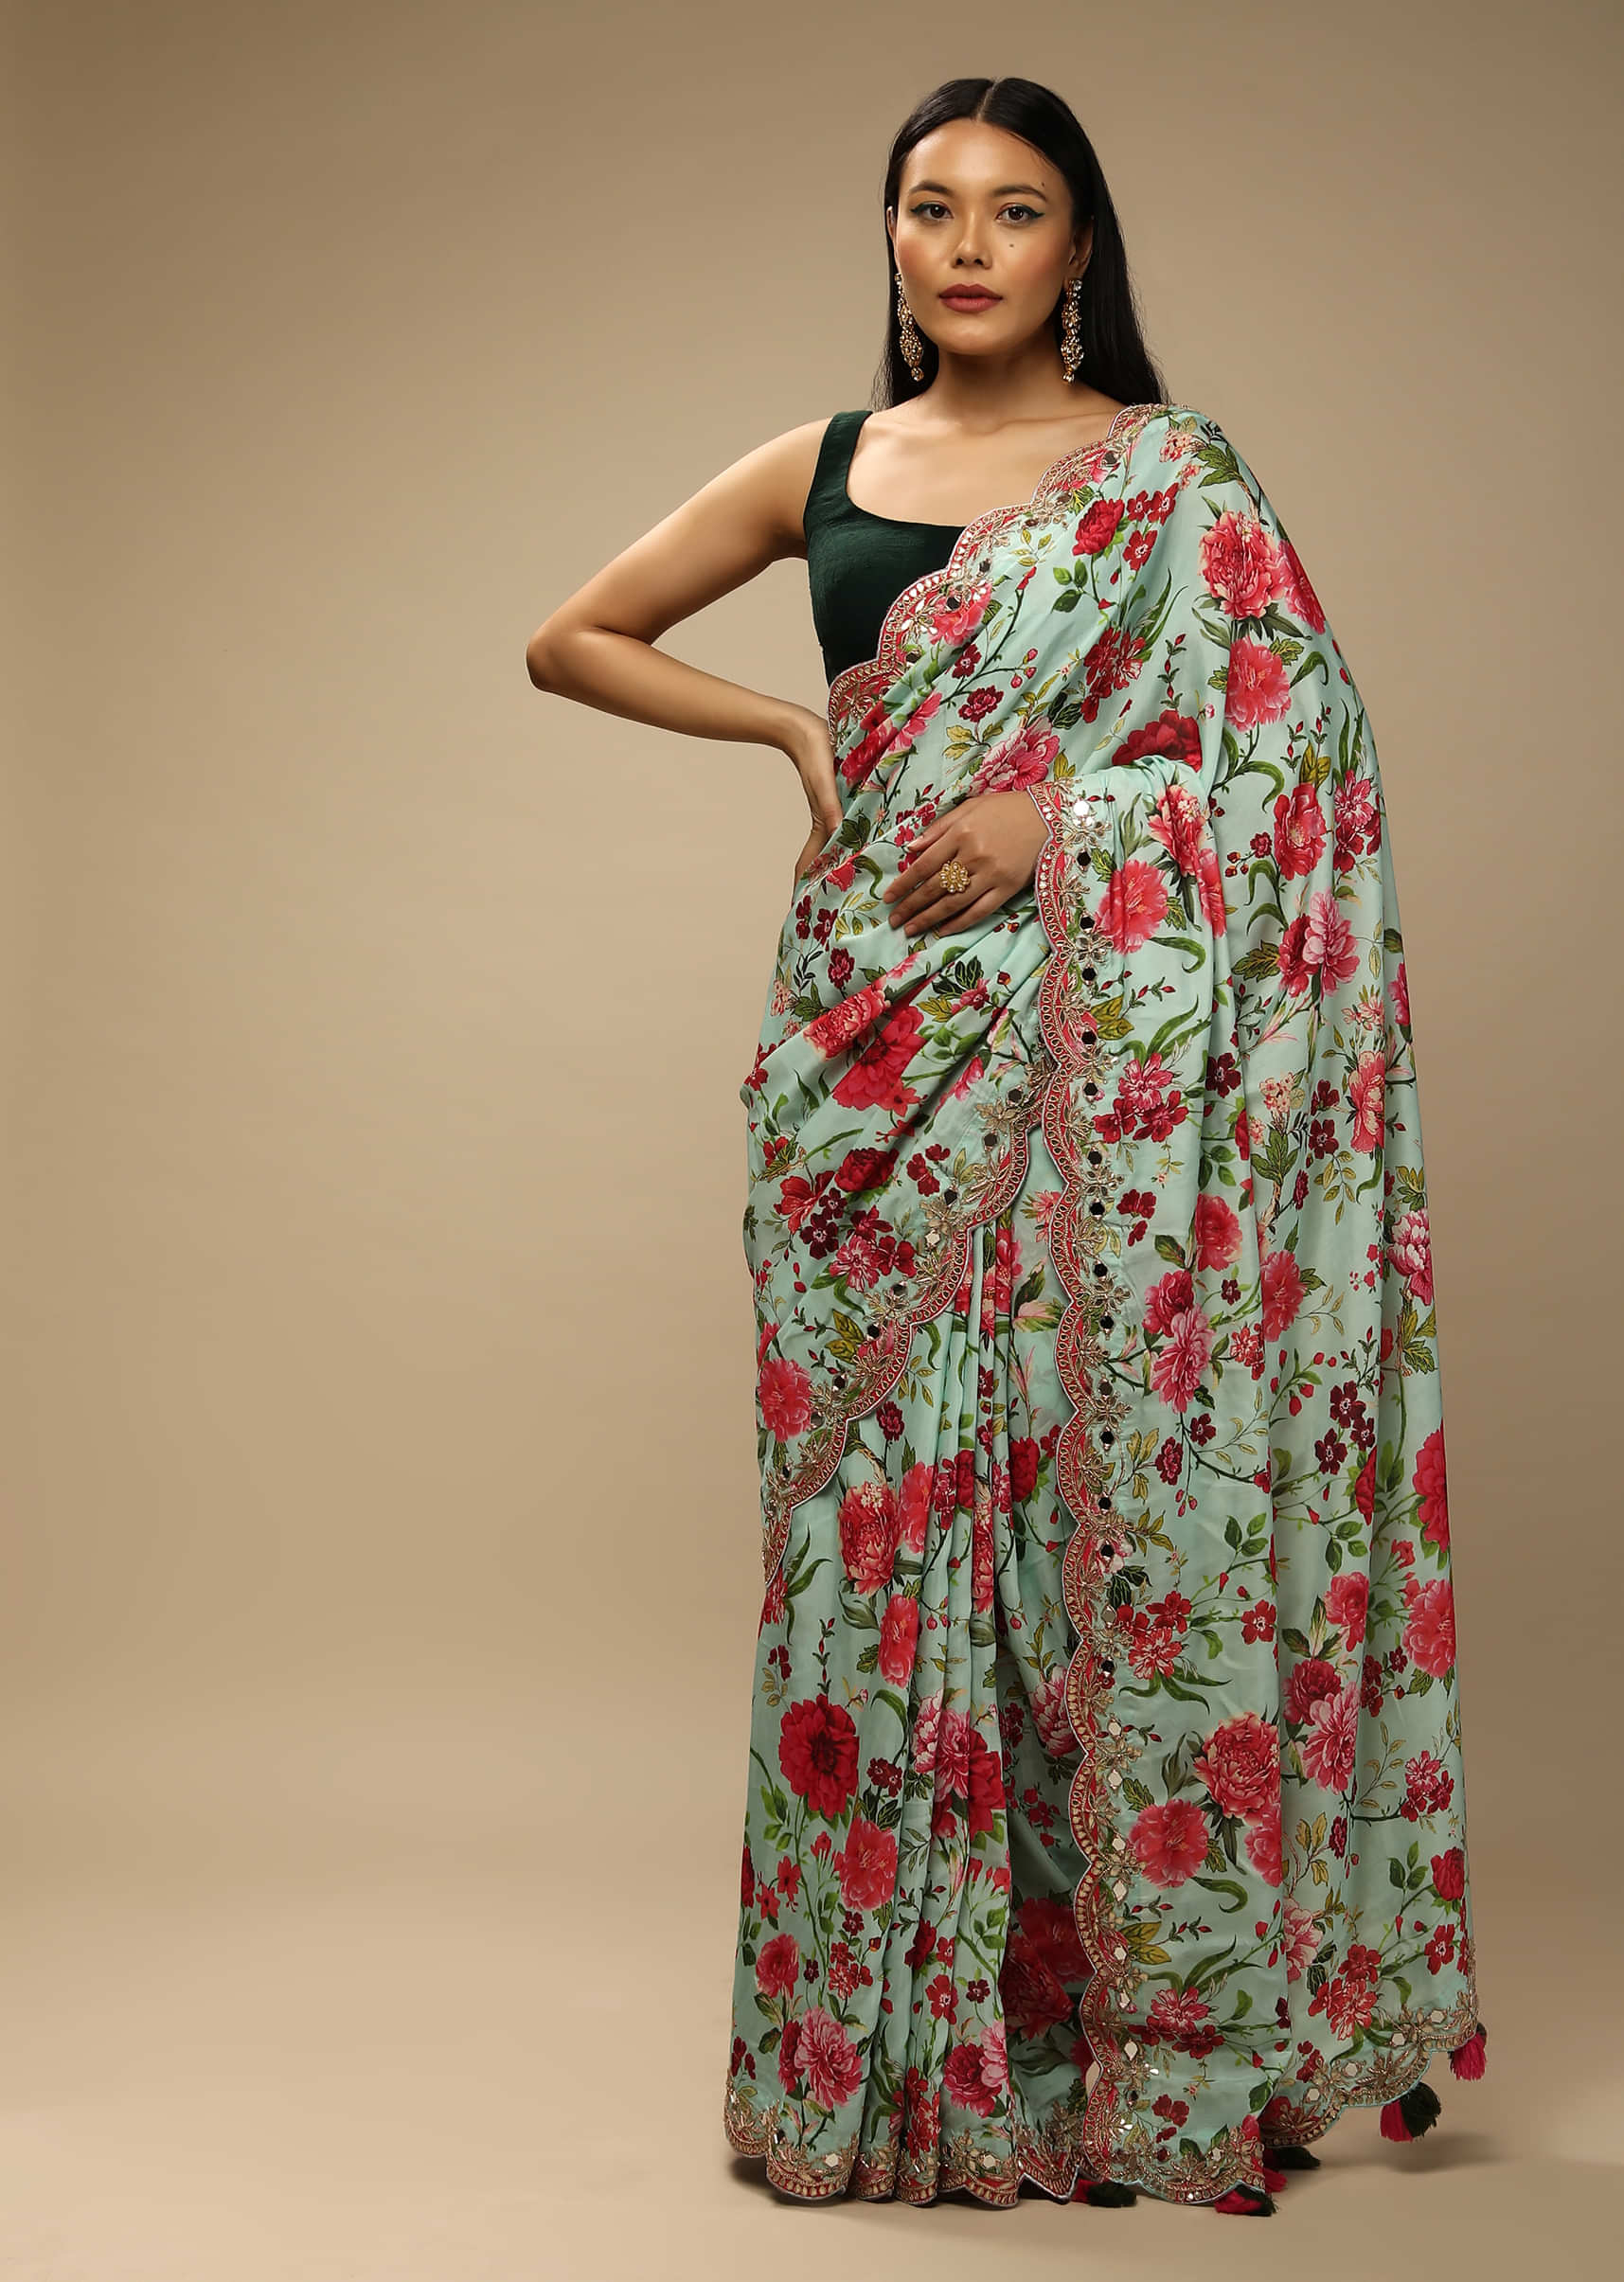 Mint Saree In Cotton Silk With Contrasting Floral Print And Gotta Embroidered Scallop Border